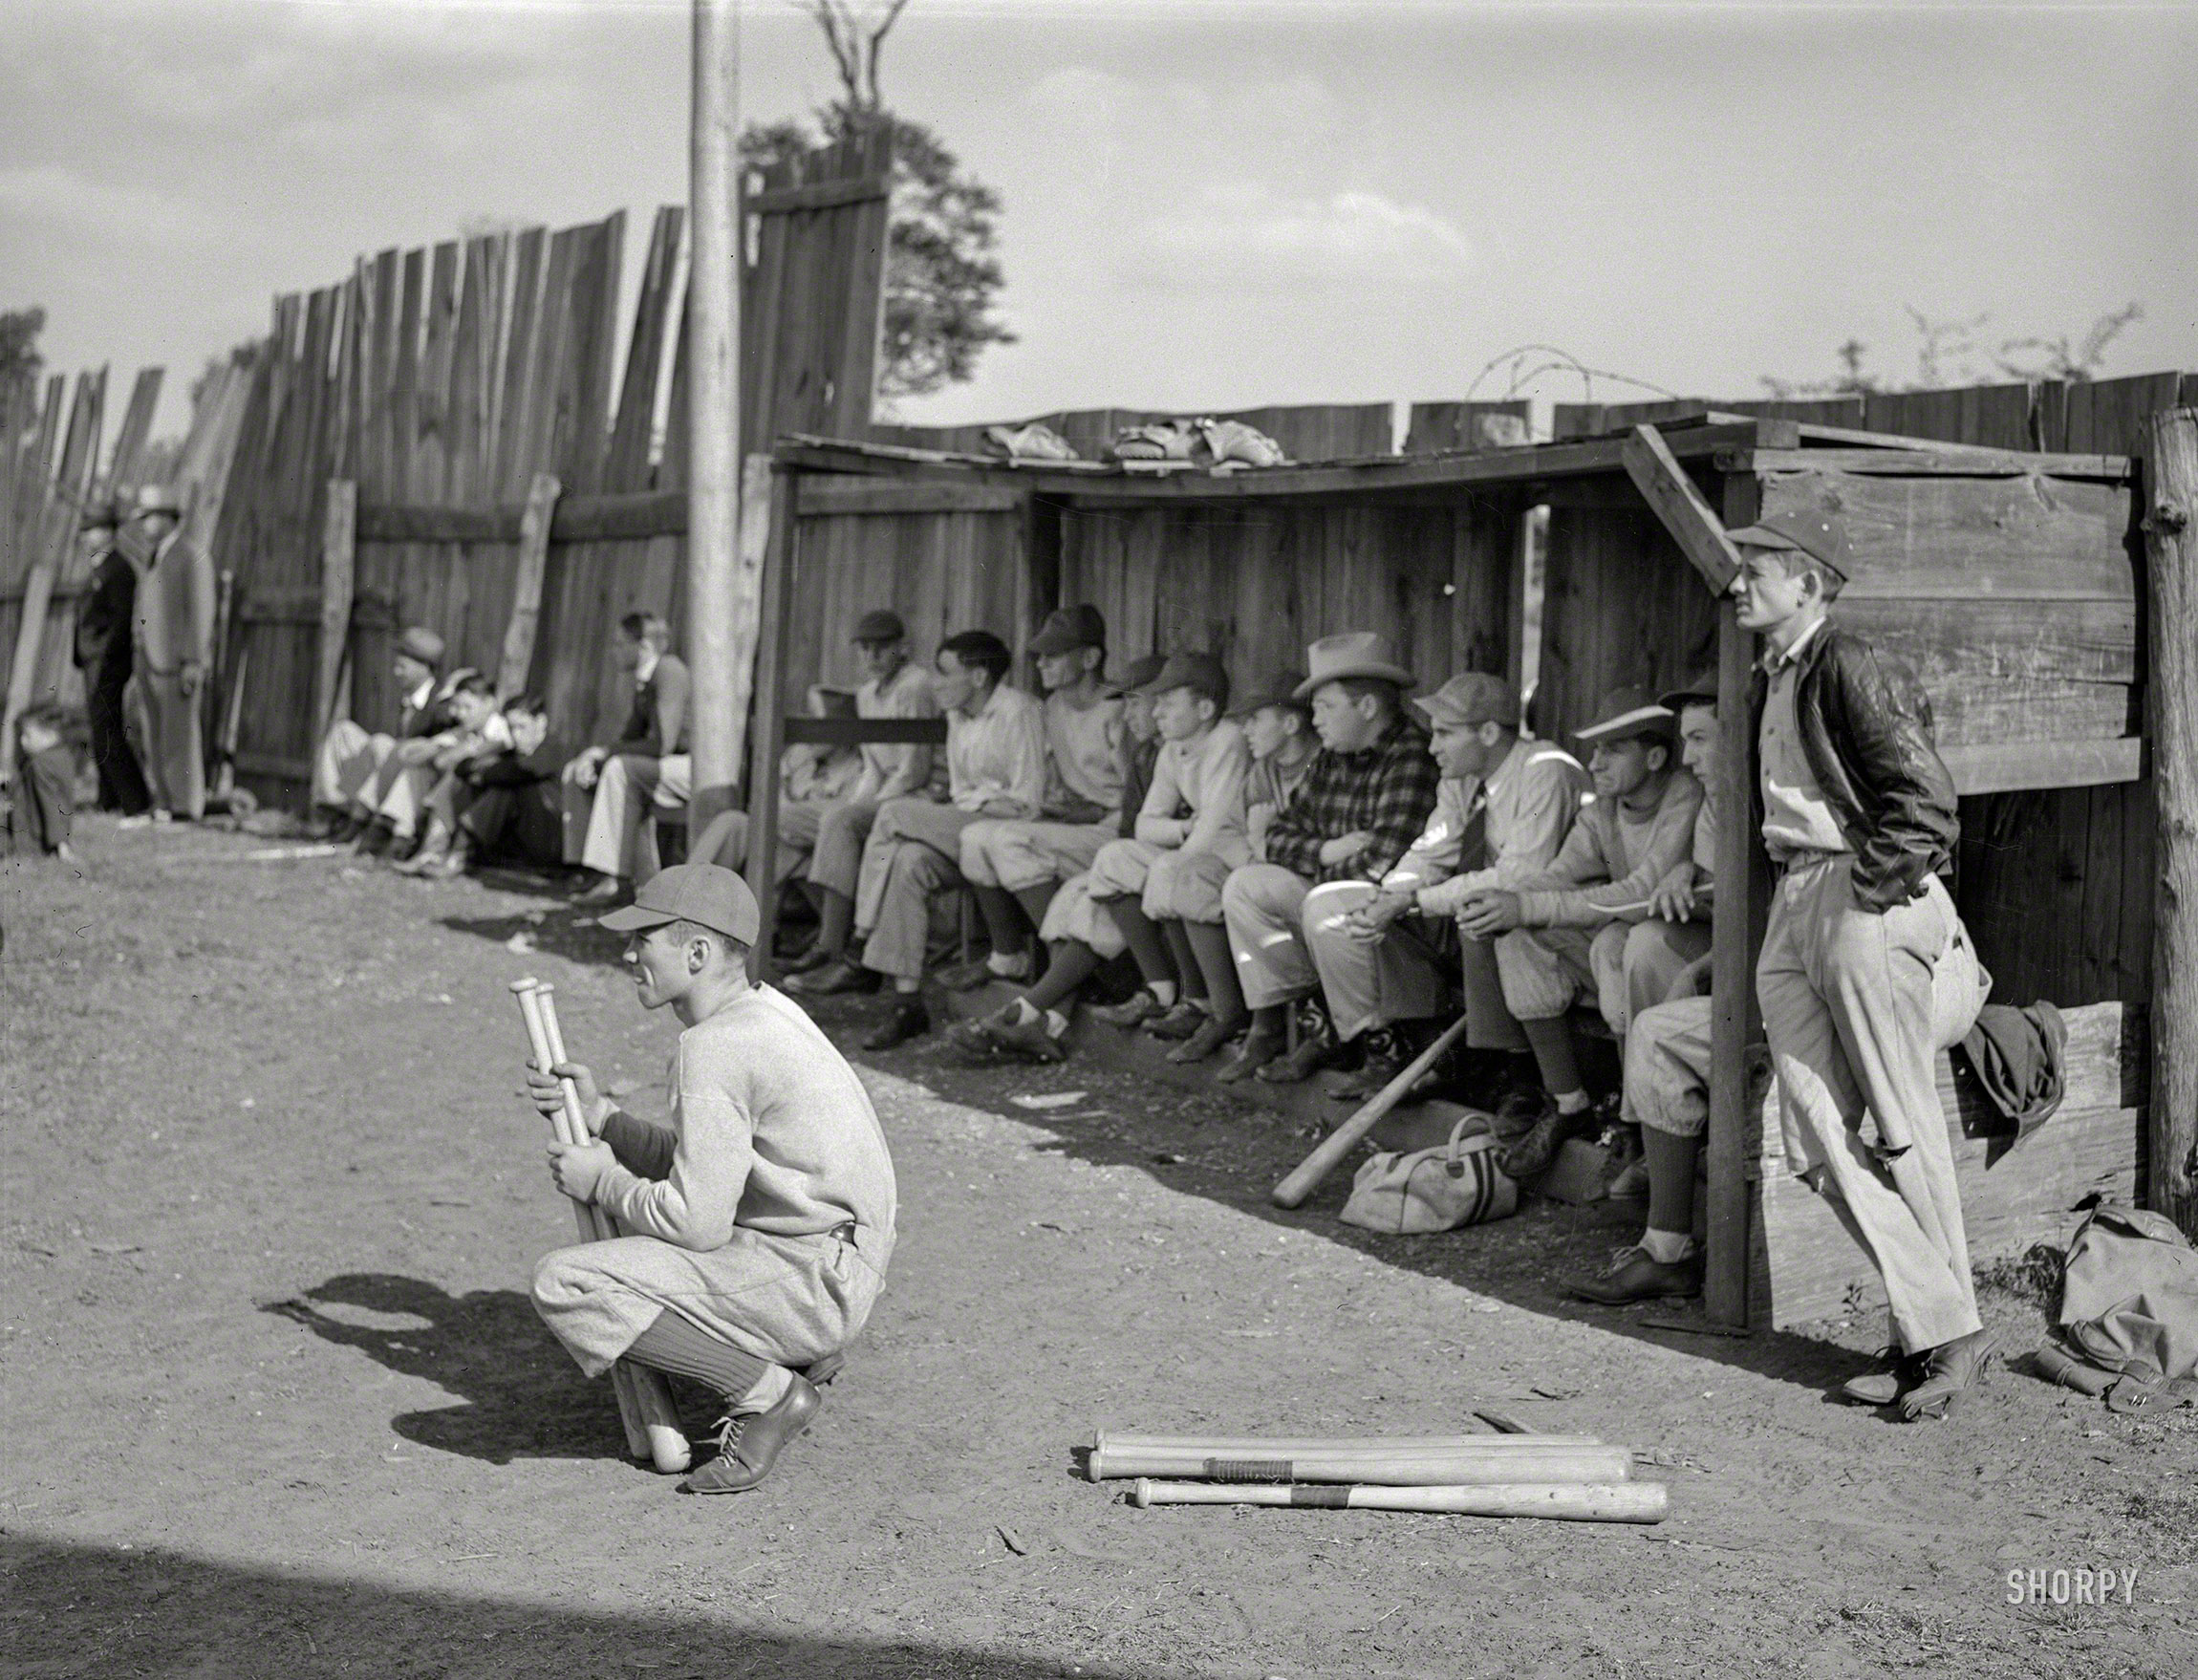 April 1939. "Baseball game in San Augustine, Texas." Medium format negative by Russell Lee for the Farm Security Administration. View full size.